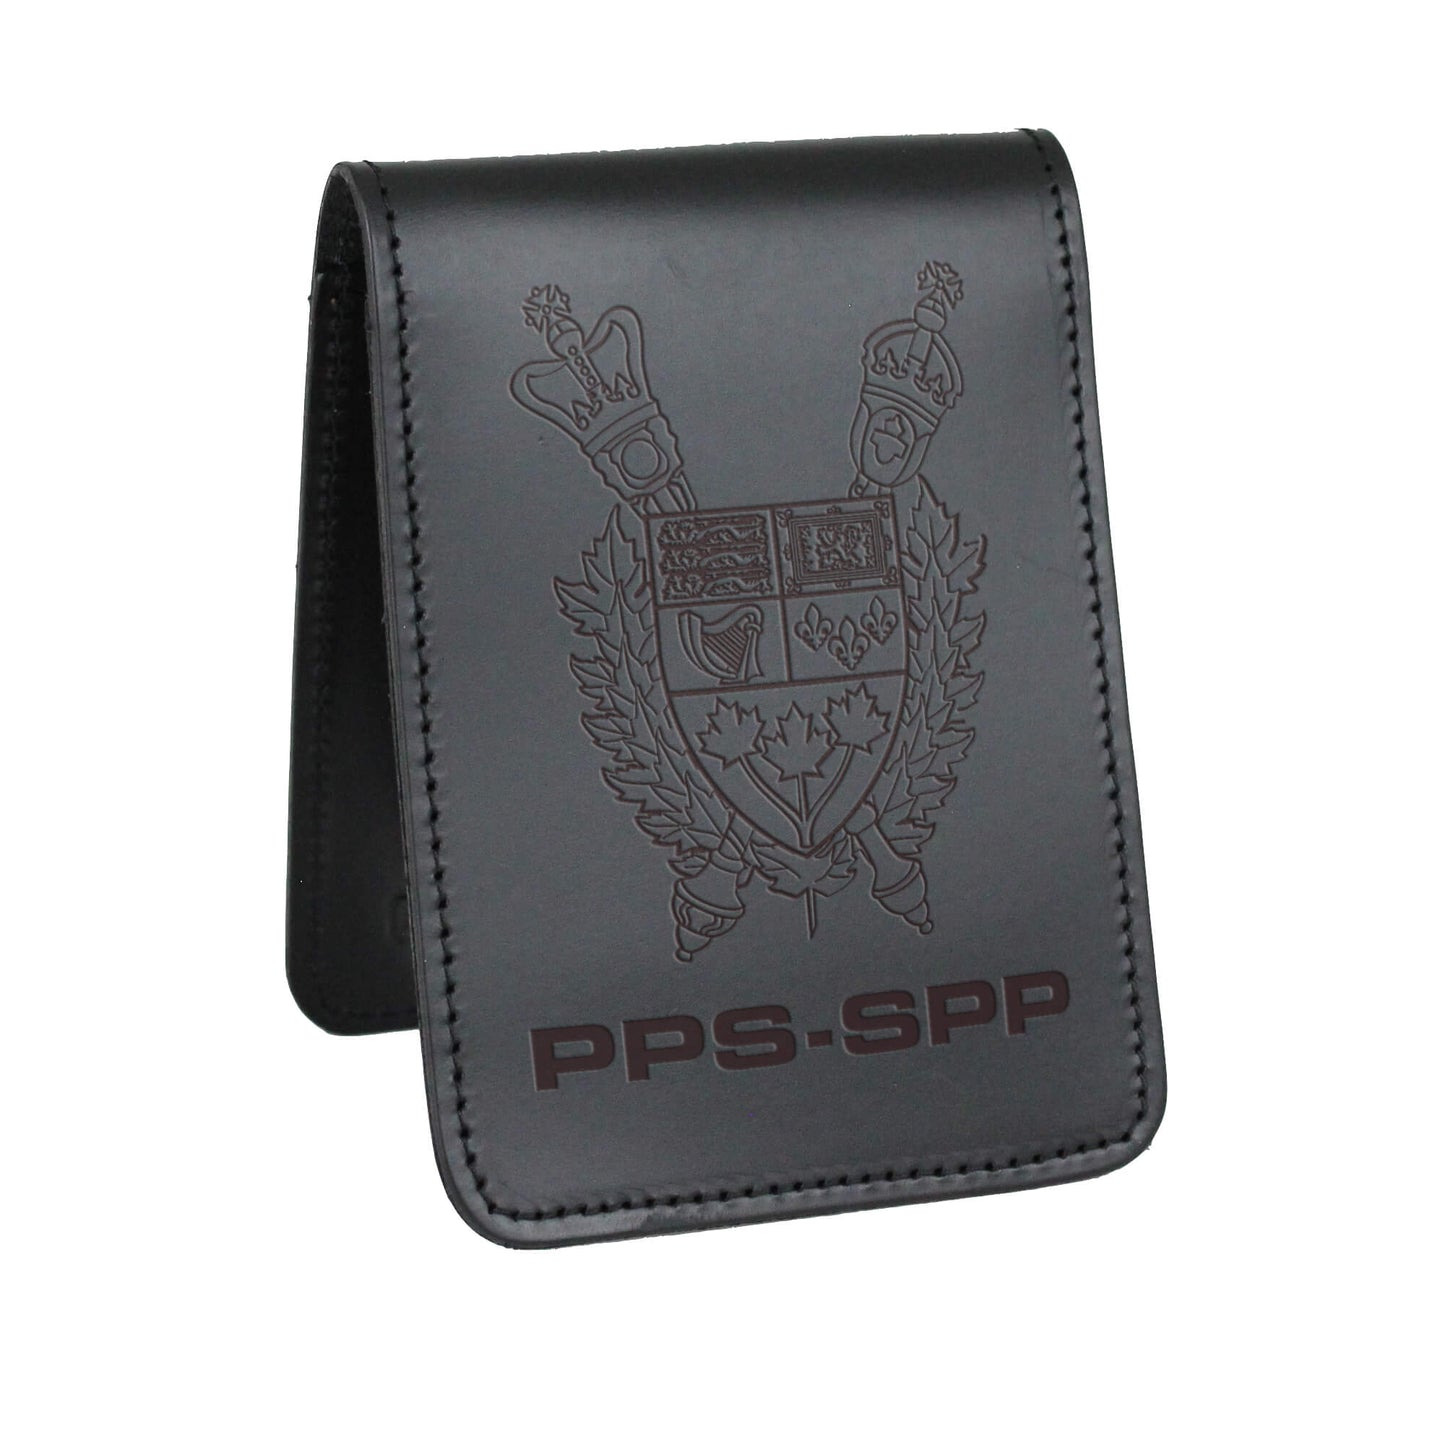 PPS-SPP Parliamentary Protective Services Notebook Cover